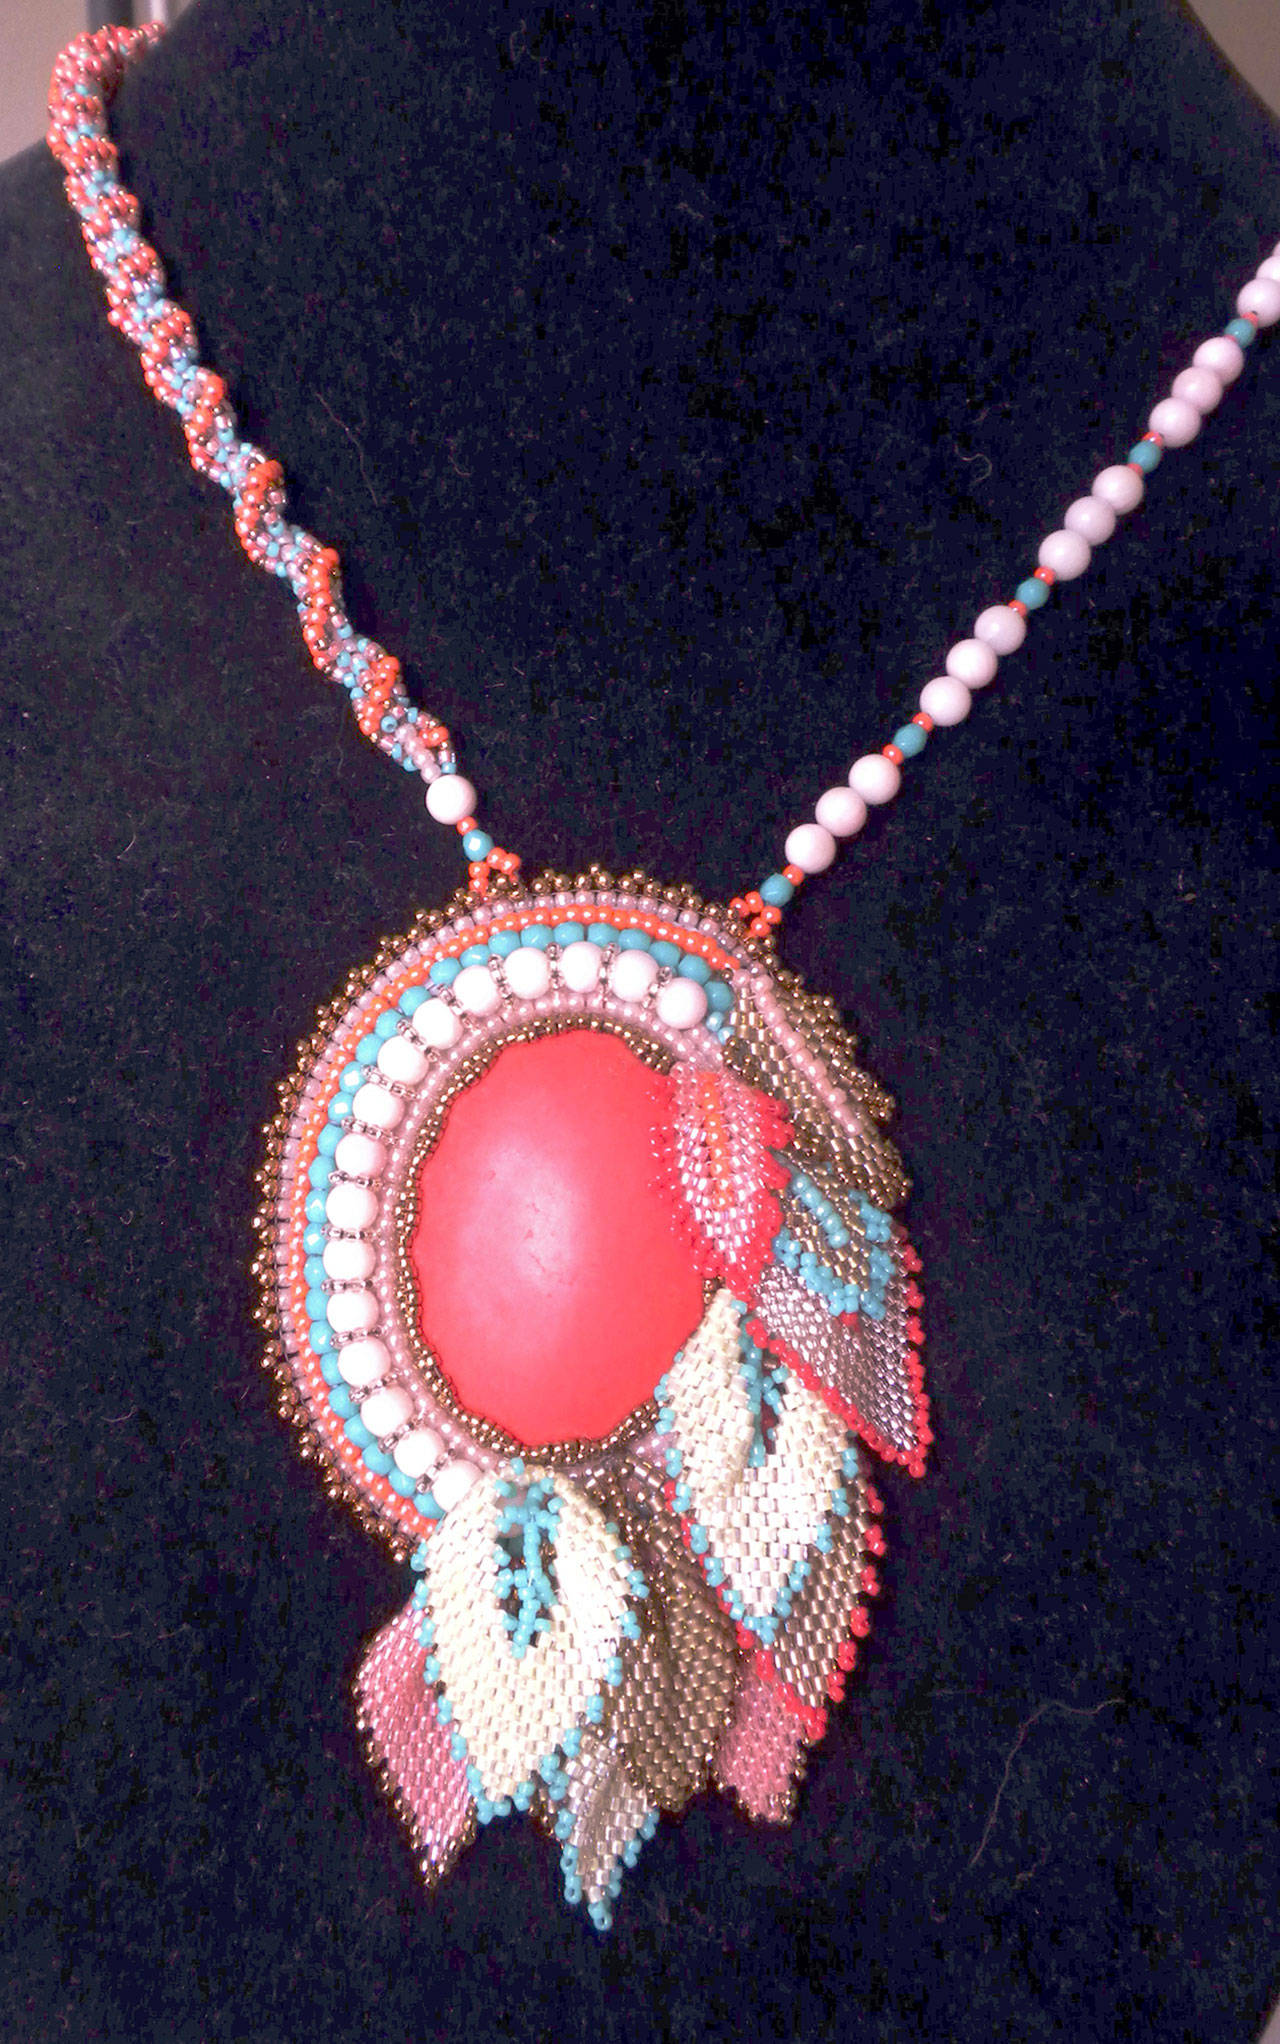 Bead work like this and other pieces by Gail McLain will be on exhibit Saturday at Harbor Art Gallery.